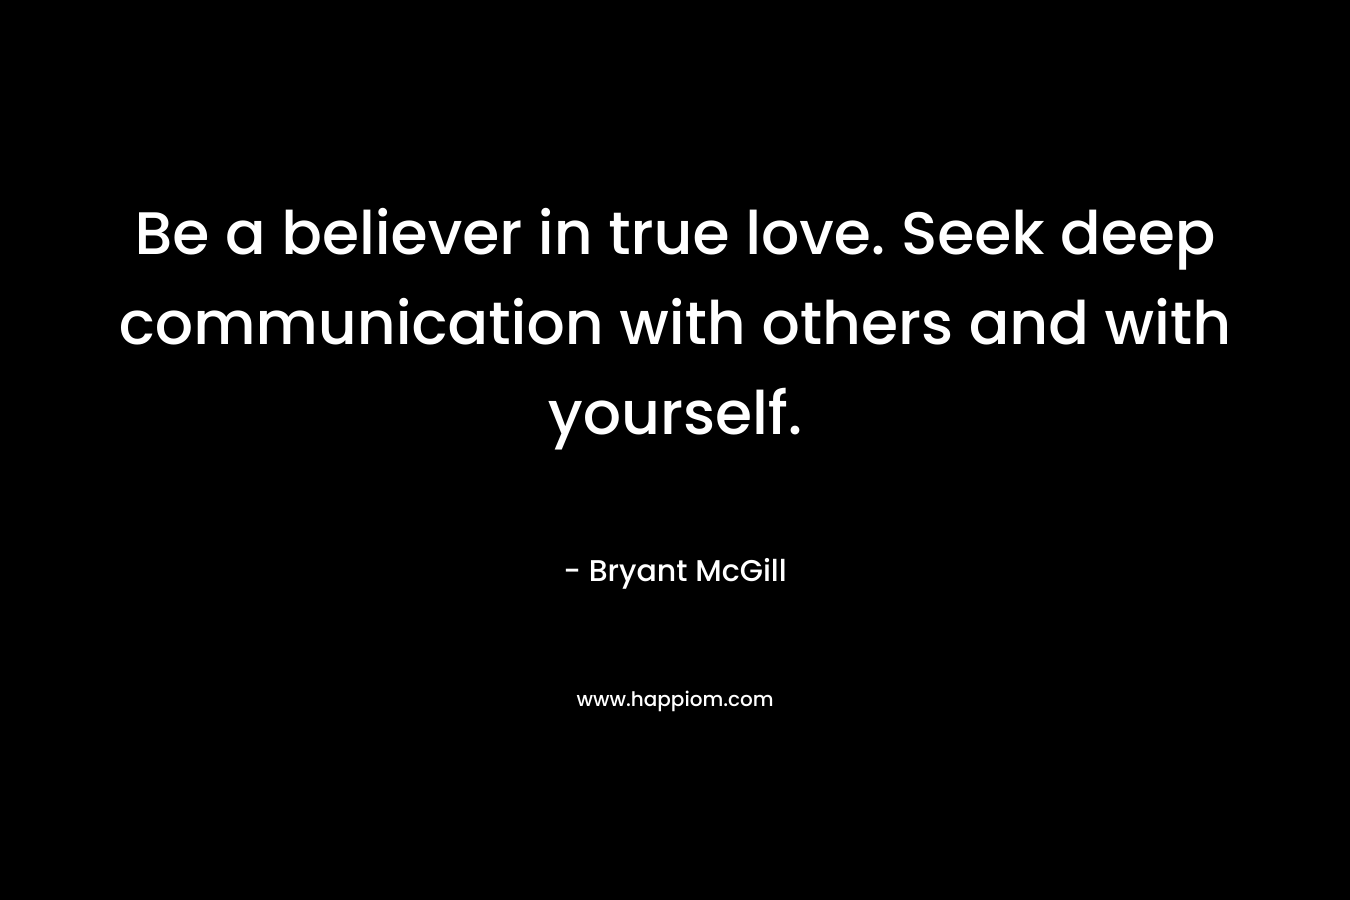 Be a believer in true love. Seek deep communication with others and with yourself.